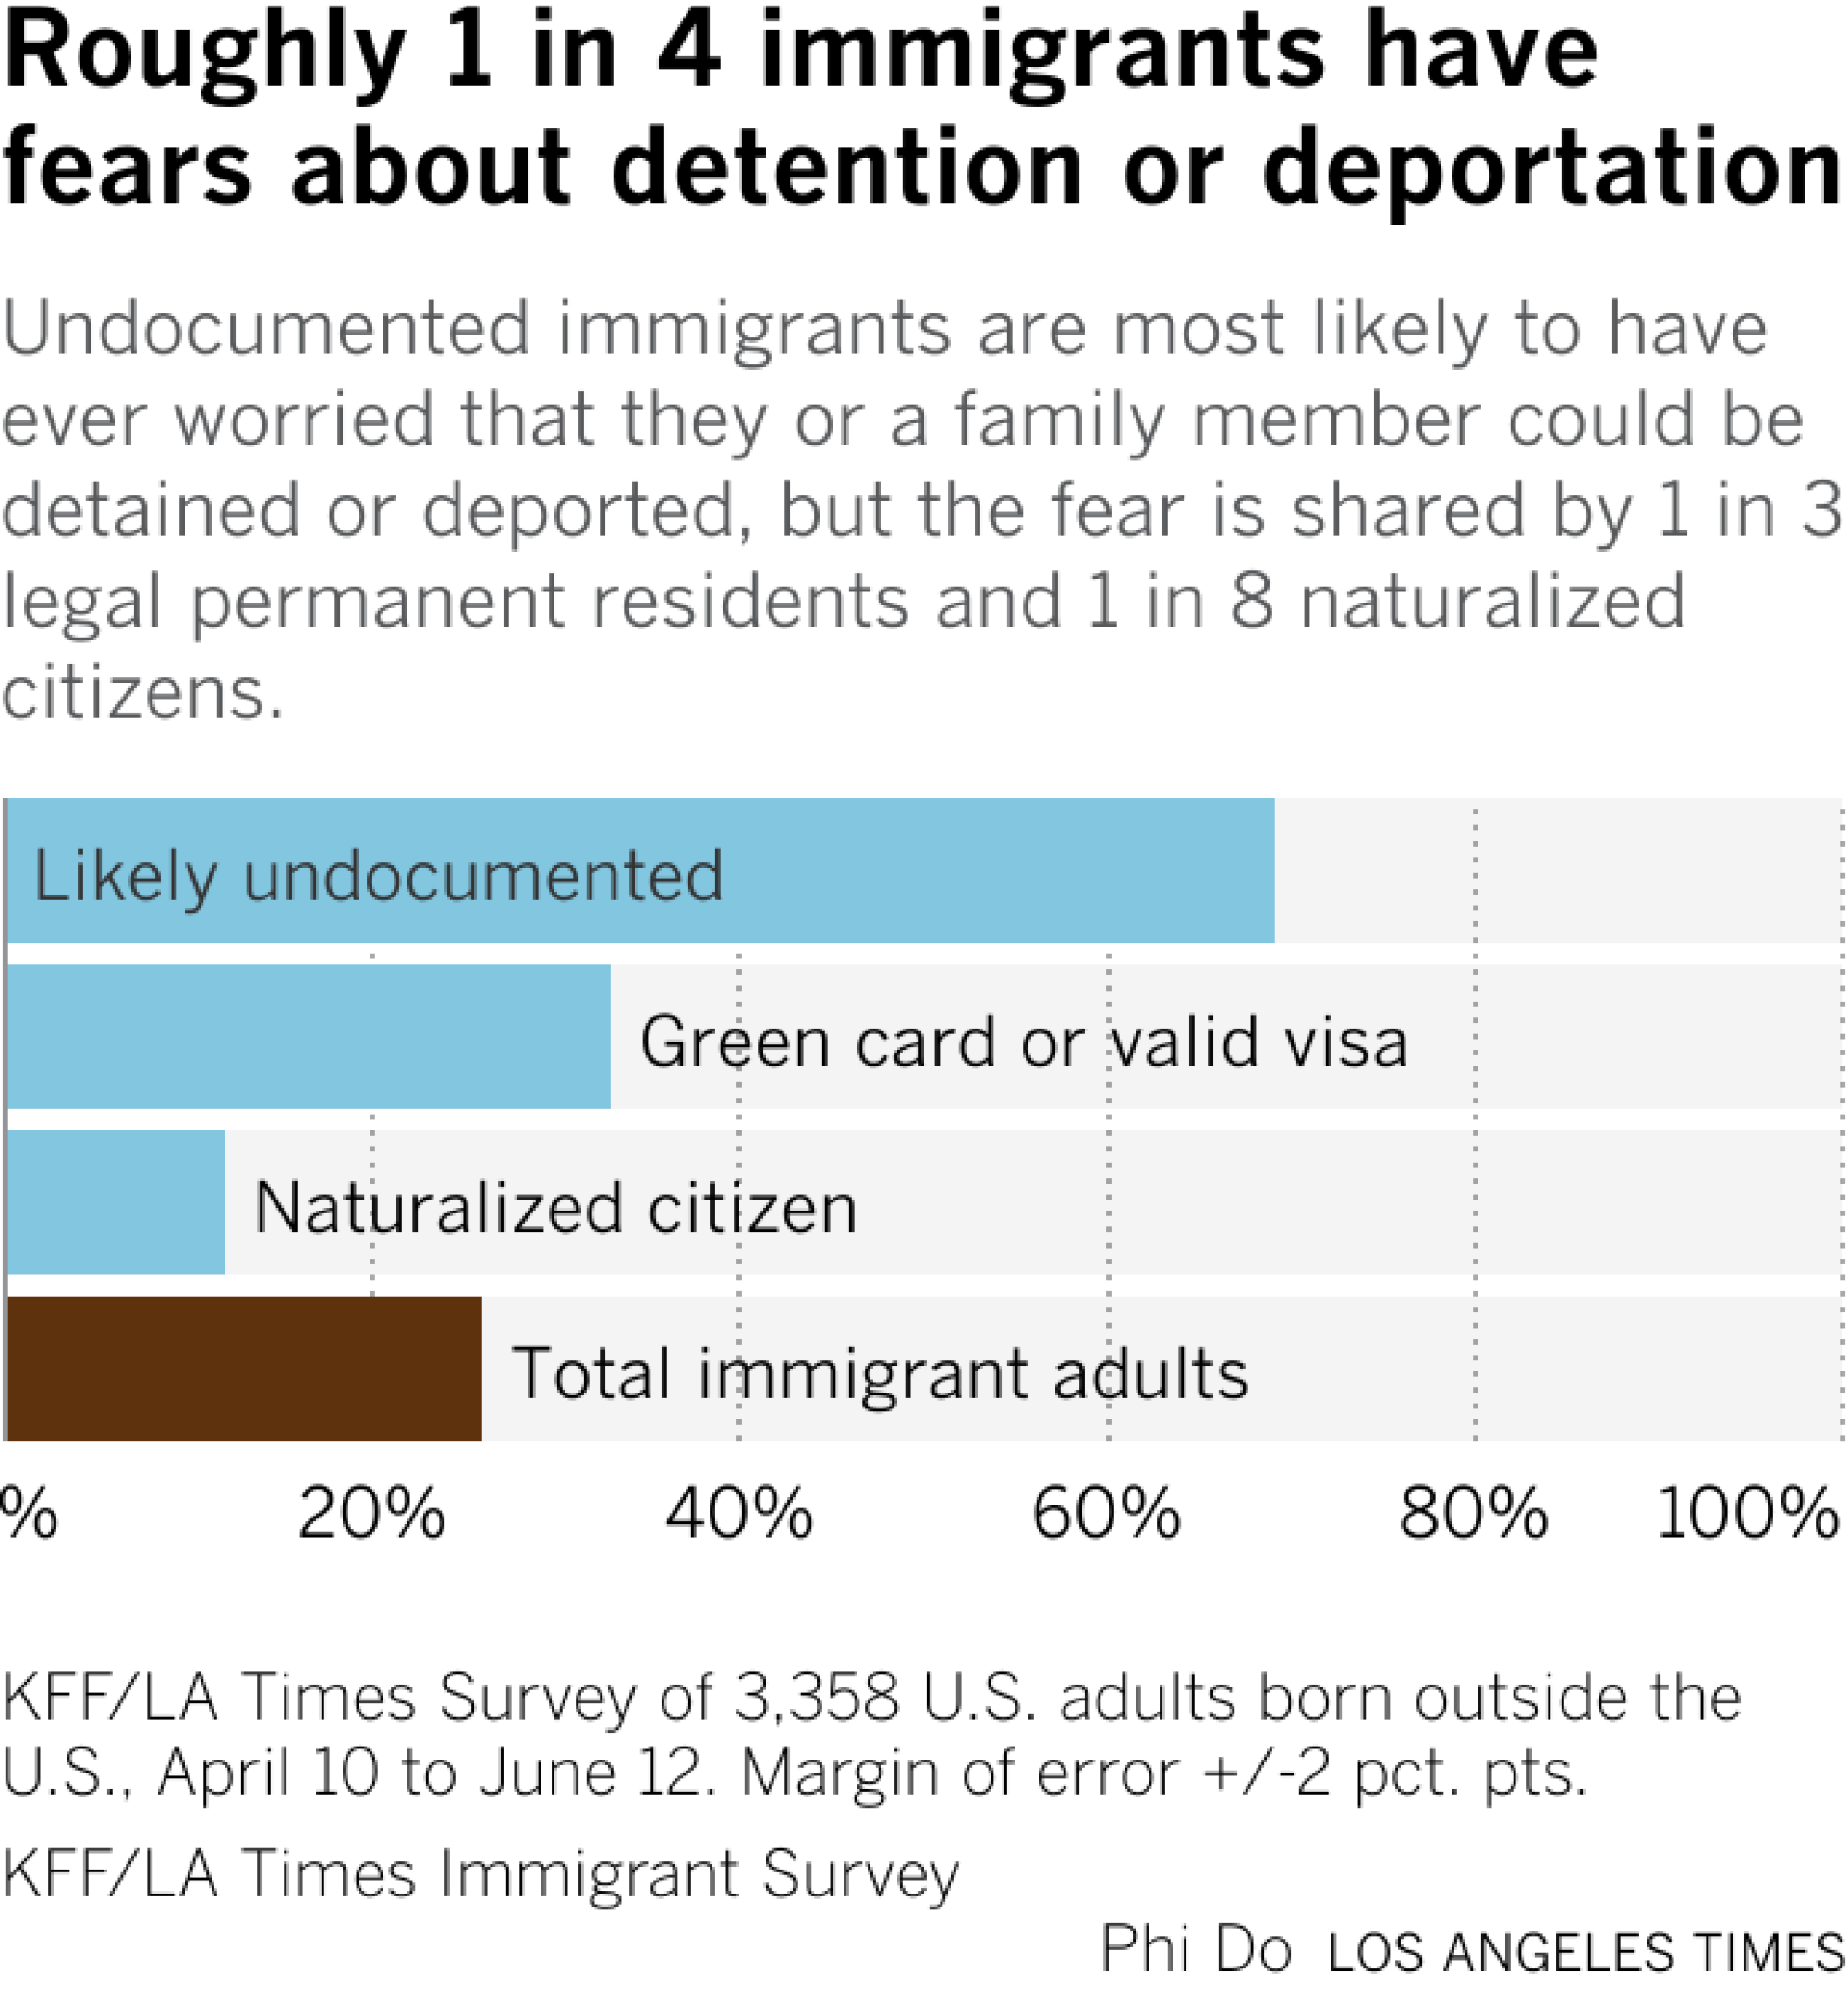 Horizontal bar chart showing how many responded yes to whether they worry they or a family member may be detained or deported